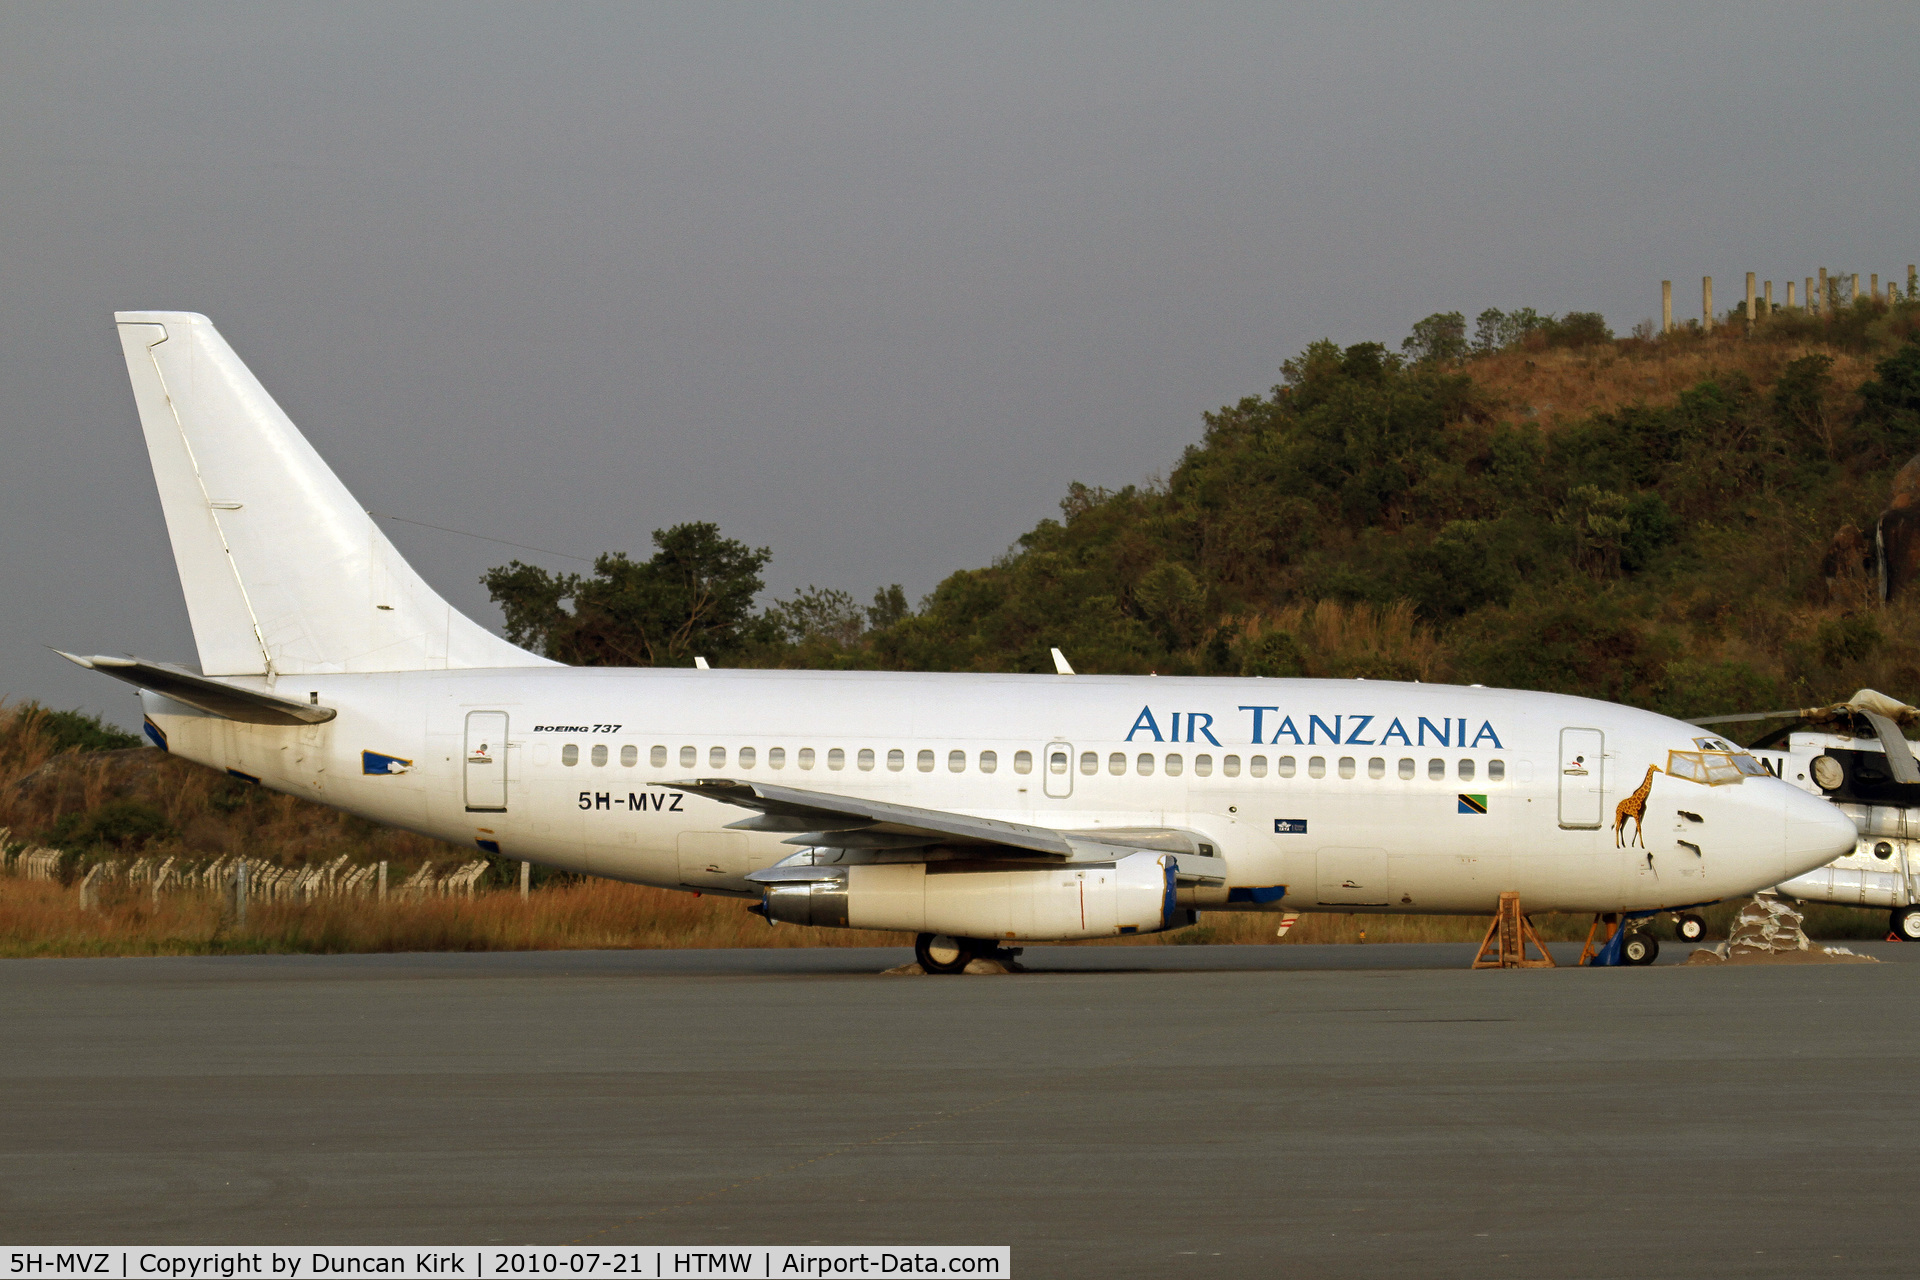 5H-MVZ, 1987 Boeing 737-247 C/N 23602, Aircraft had a mishap at Mwanza and is still being repaired